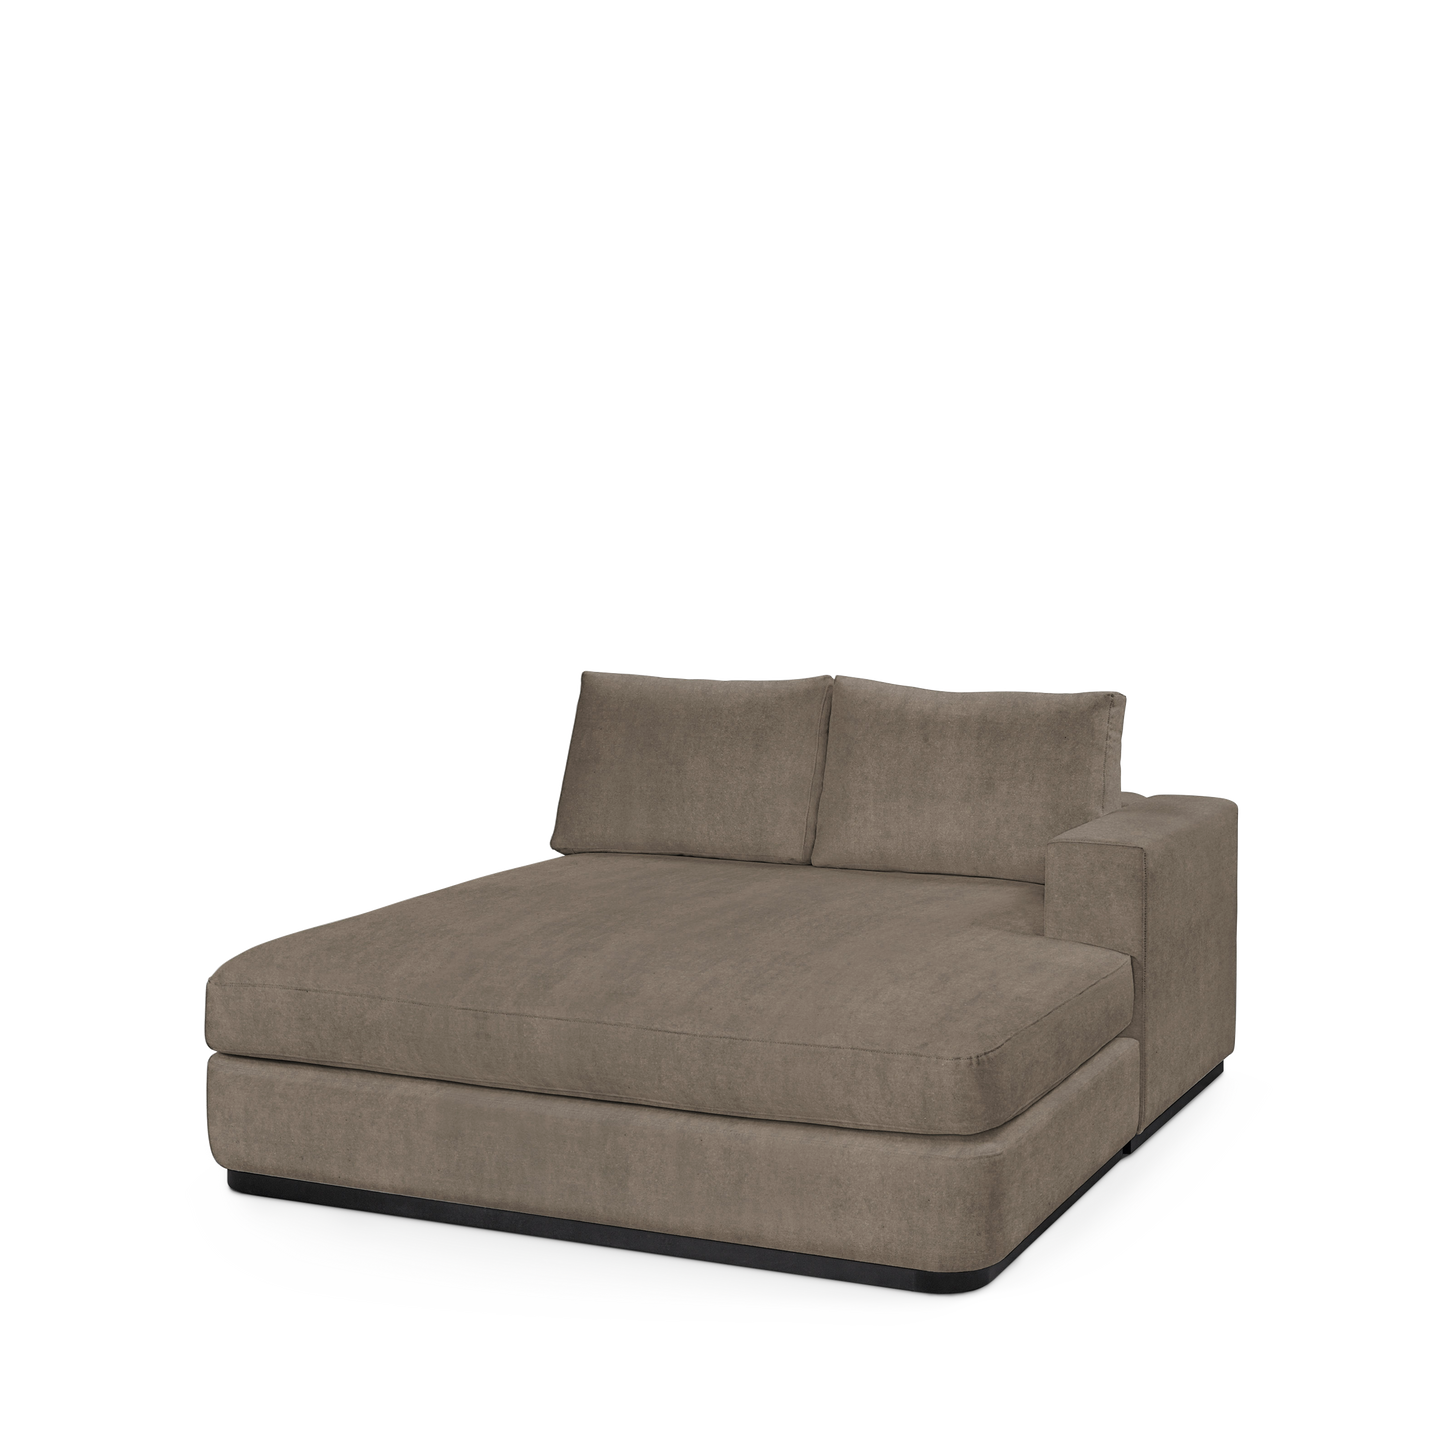 ATLAS 160 Lounge Bed arm rest right with suede grey textile